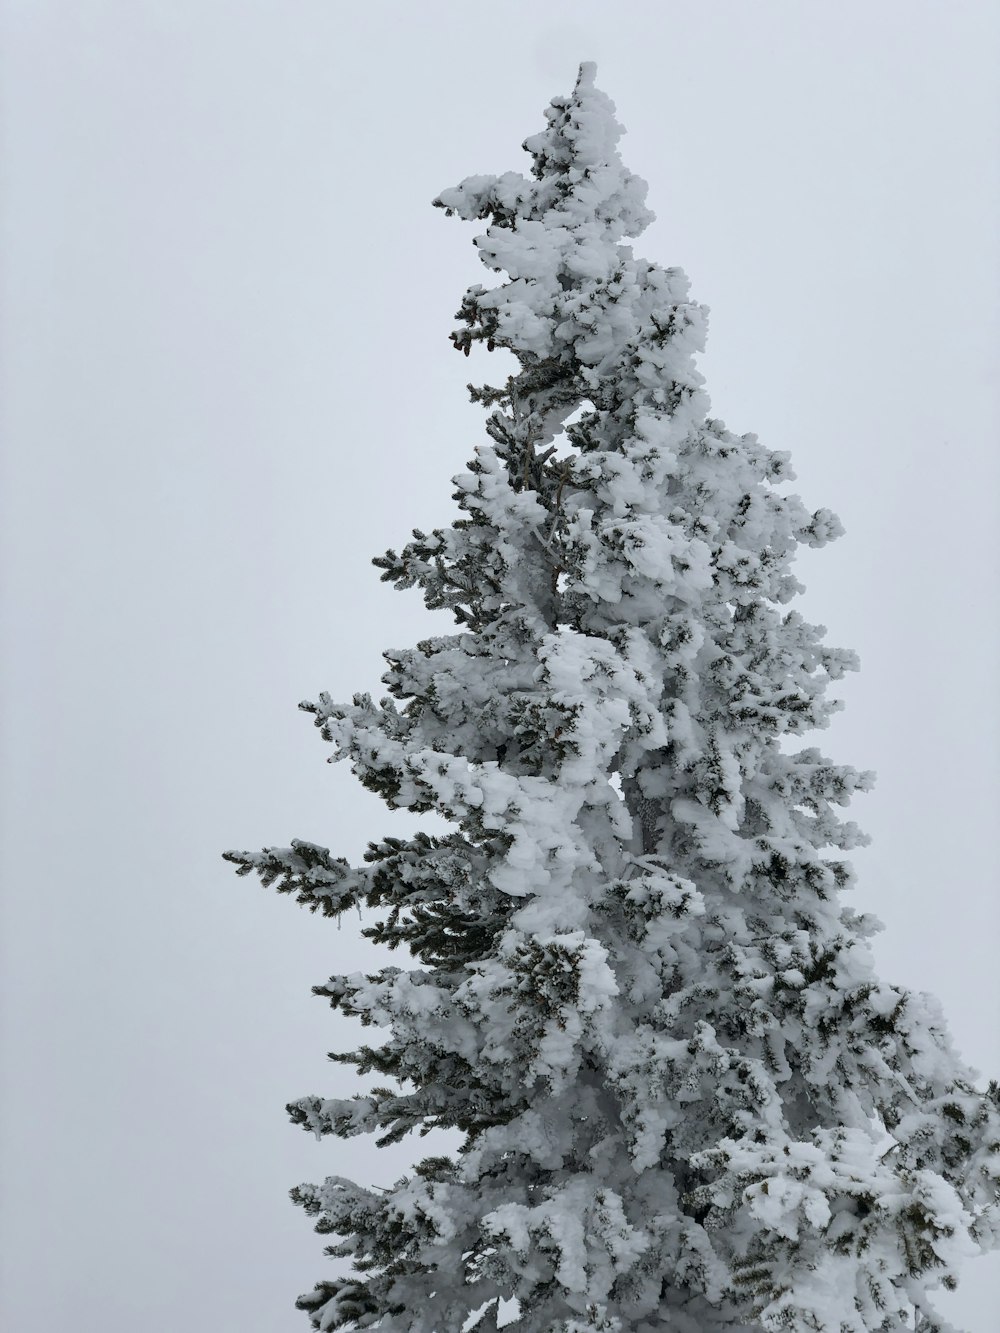 snow covered pine tree during daytime